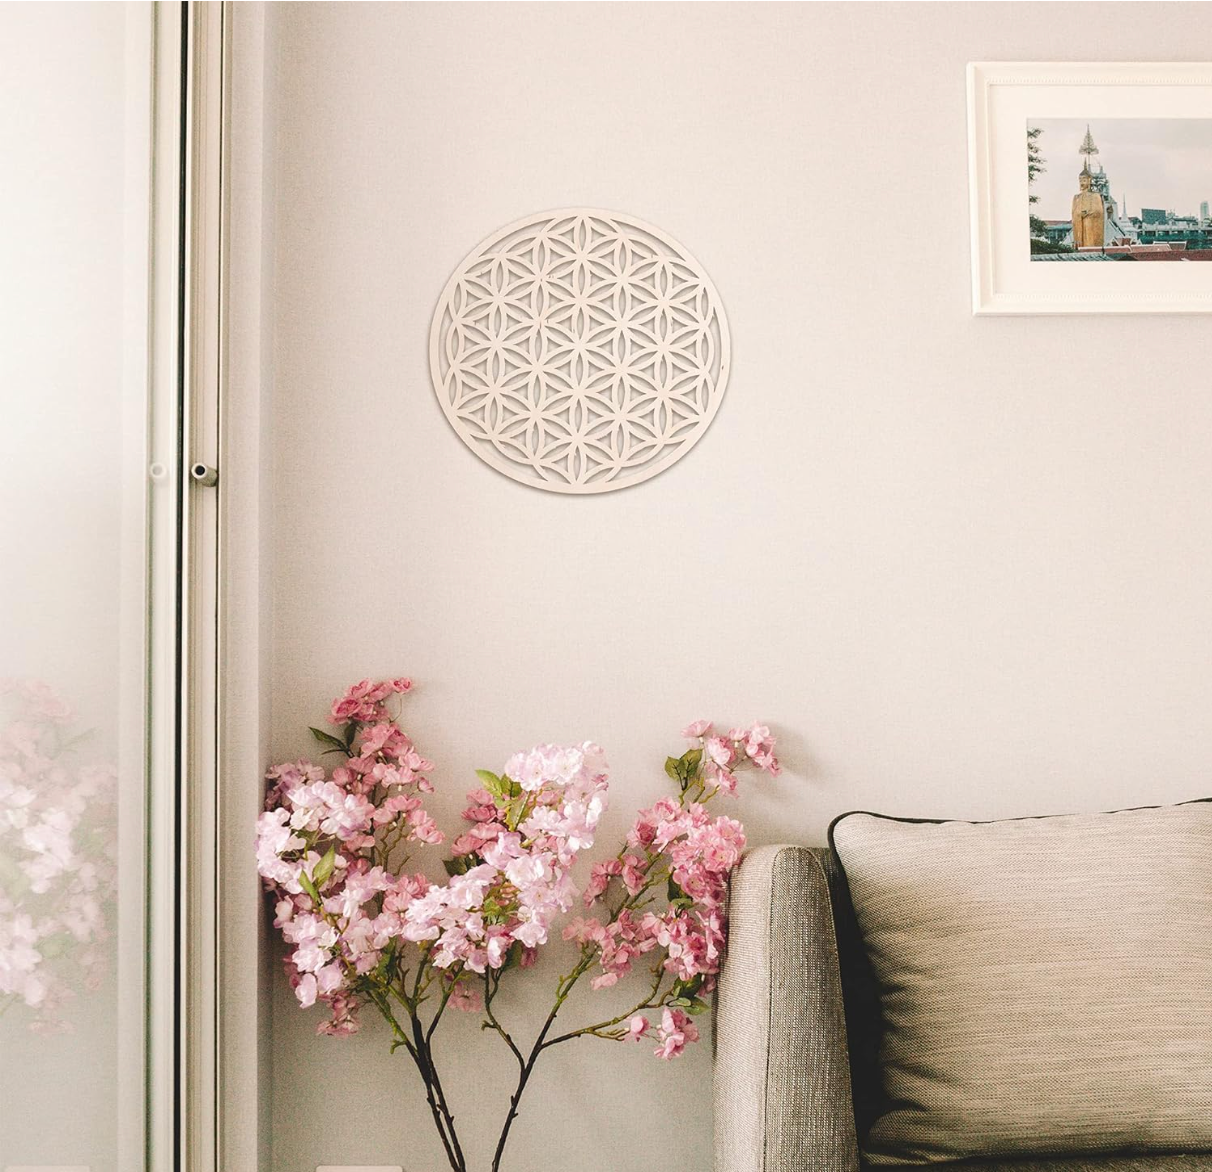 12 in Flower of Life Wall Art. Stay inspired from the wisdom of these sacred patterns.